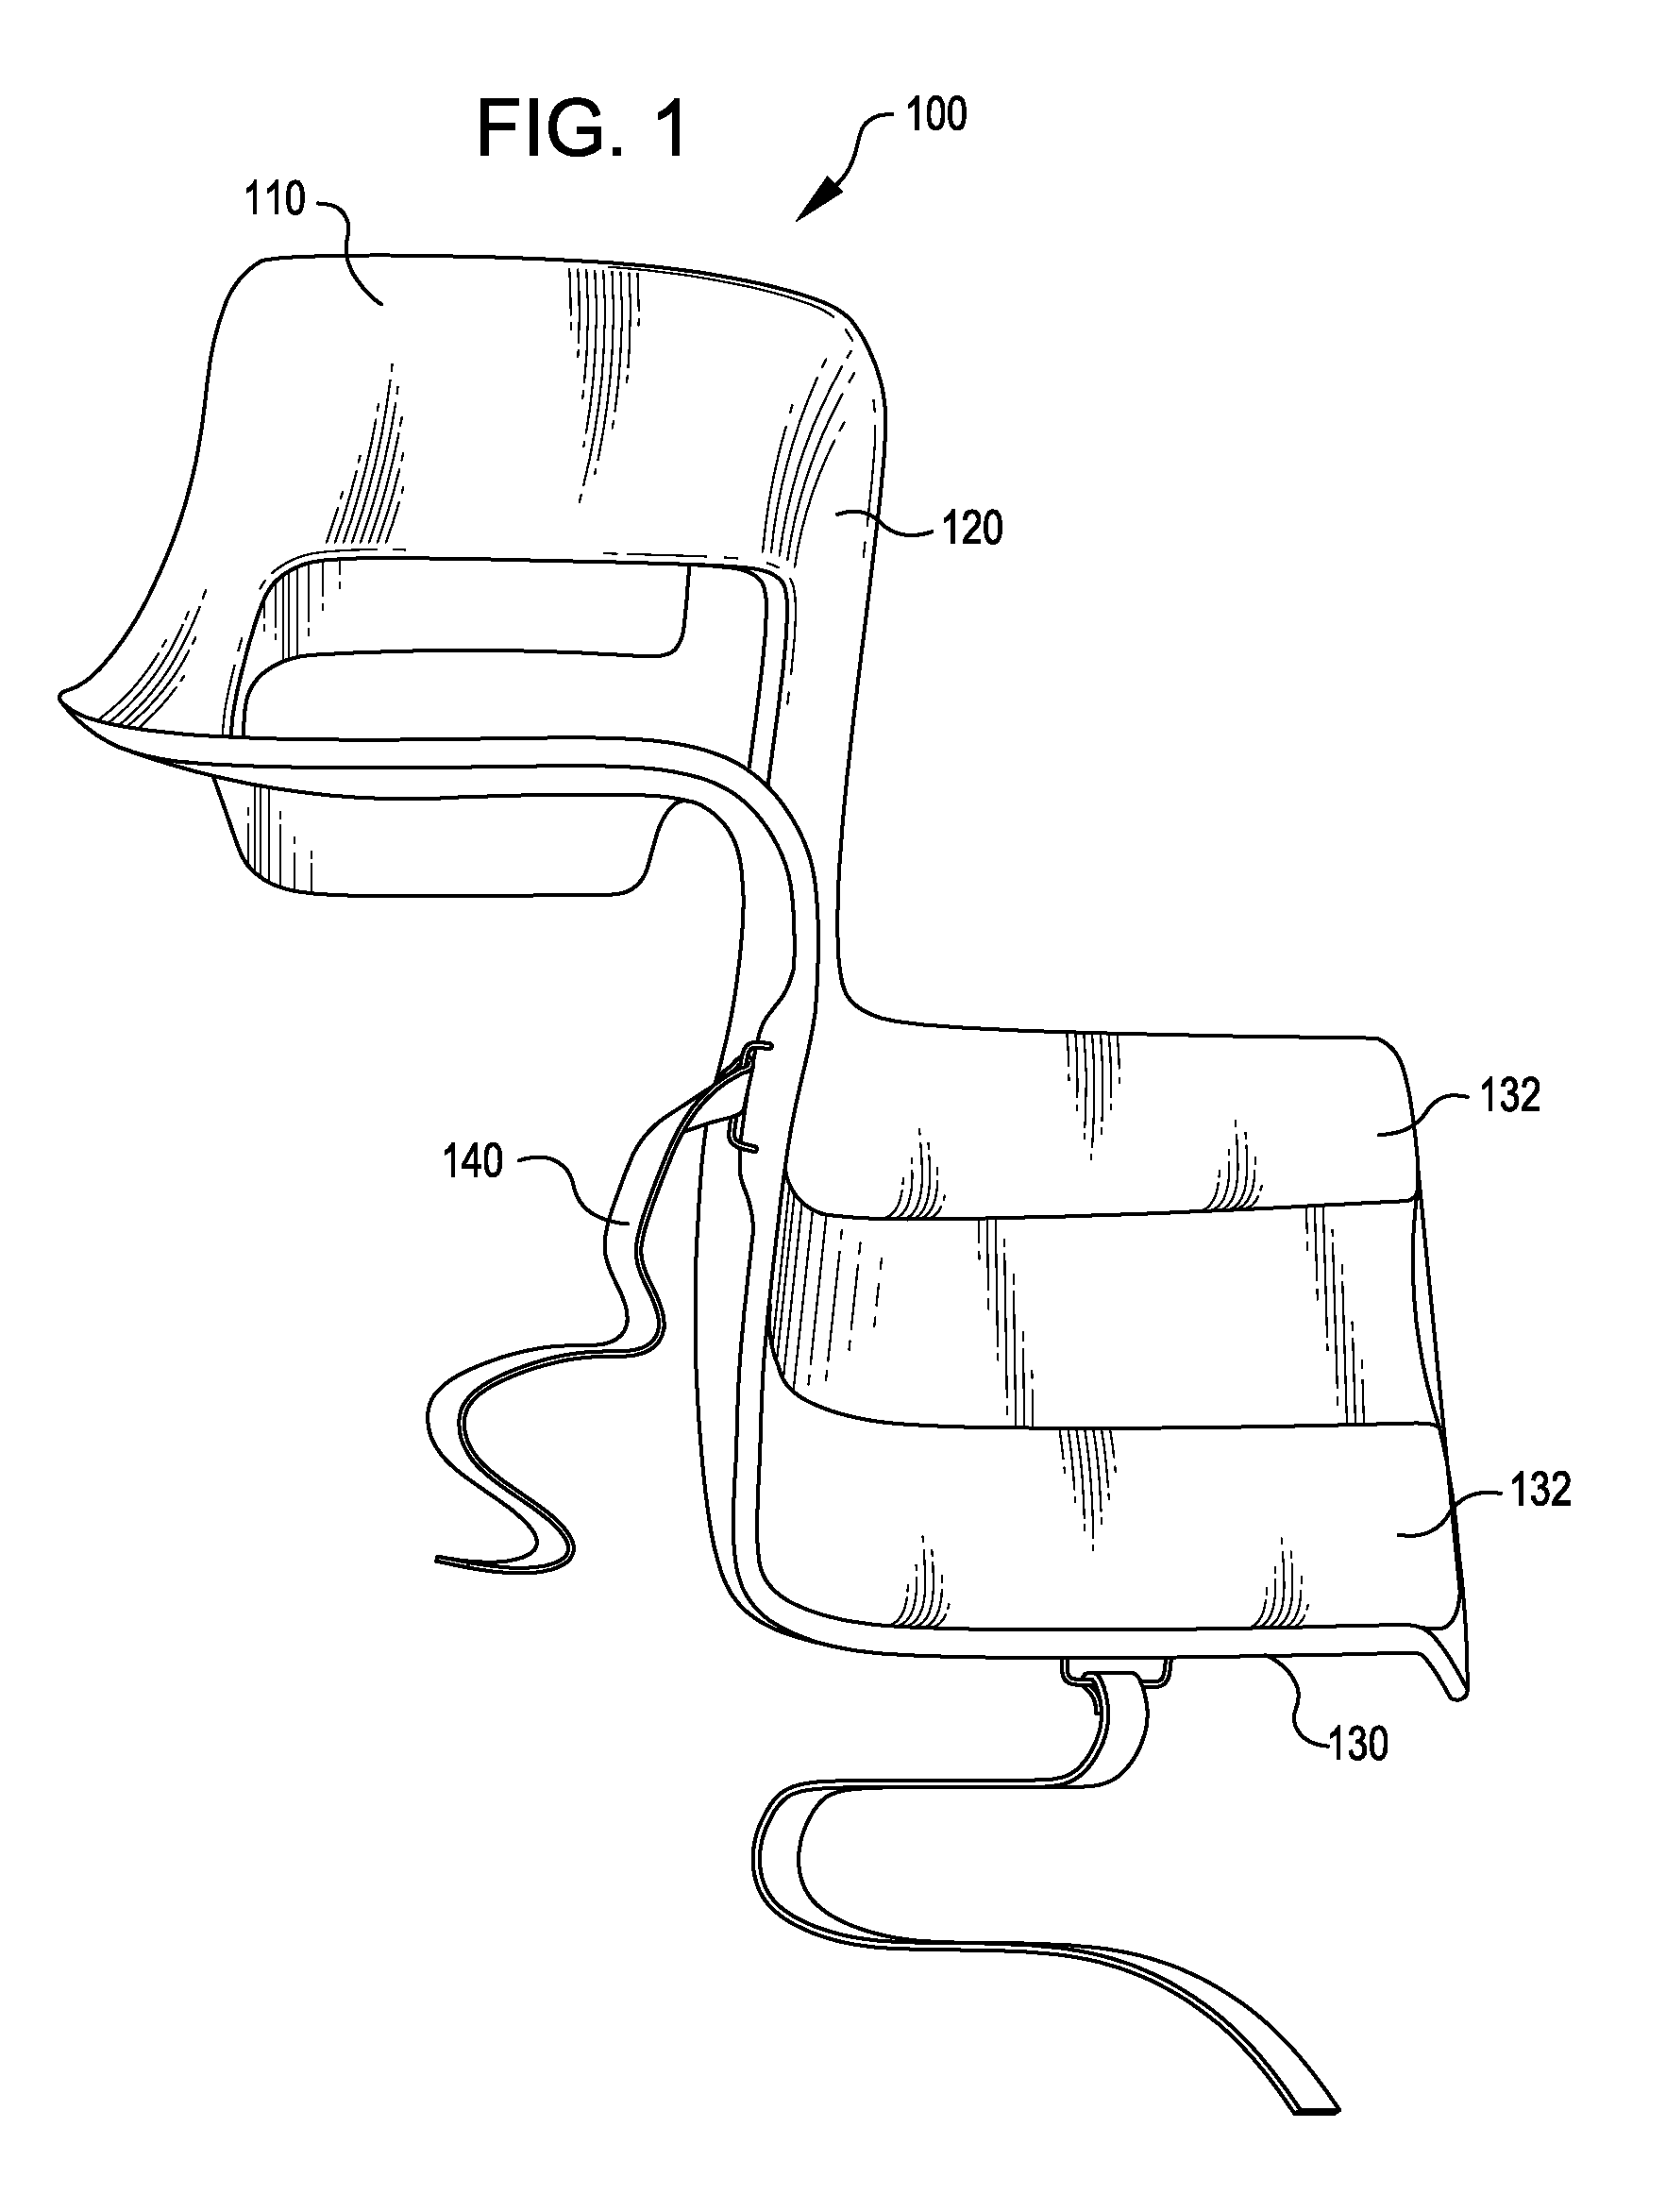 Patient positioning frame device and application technique